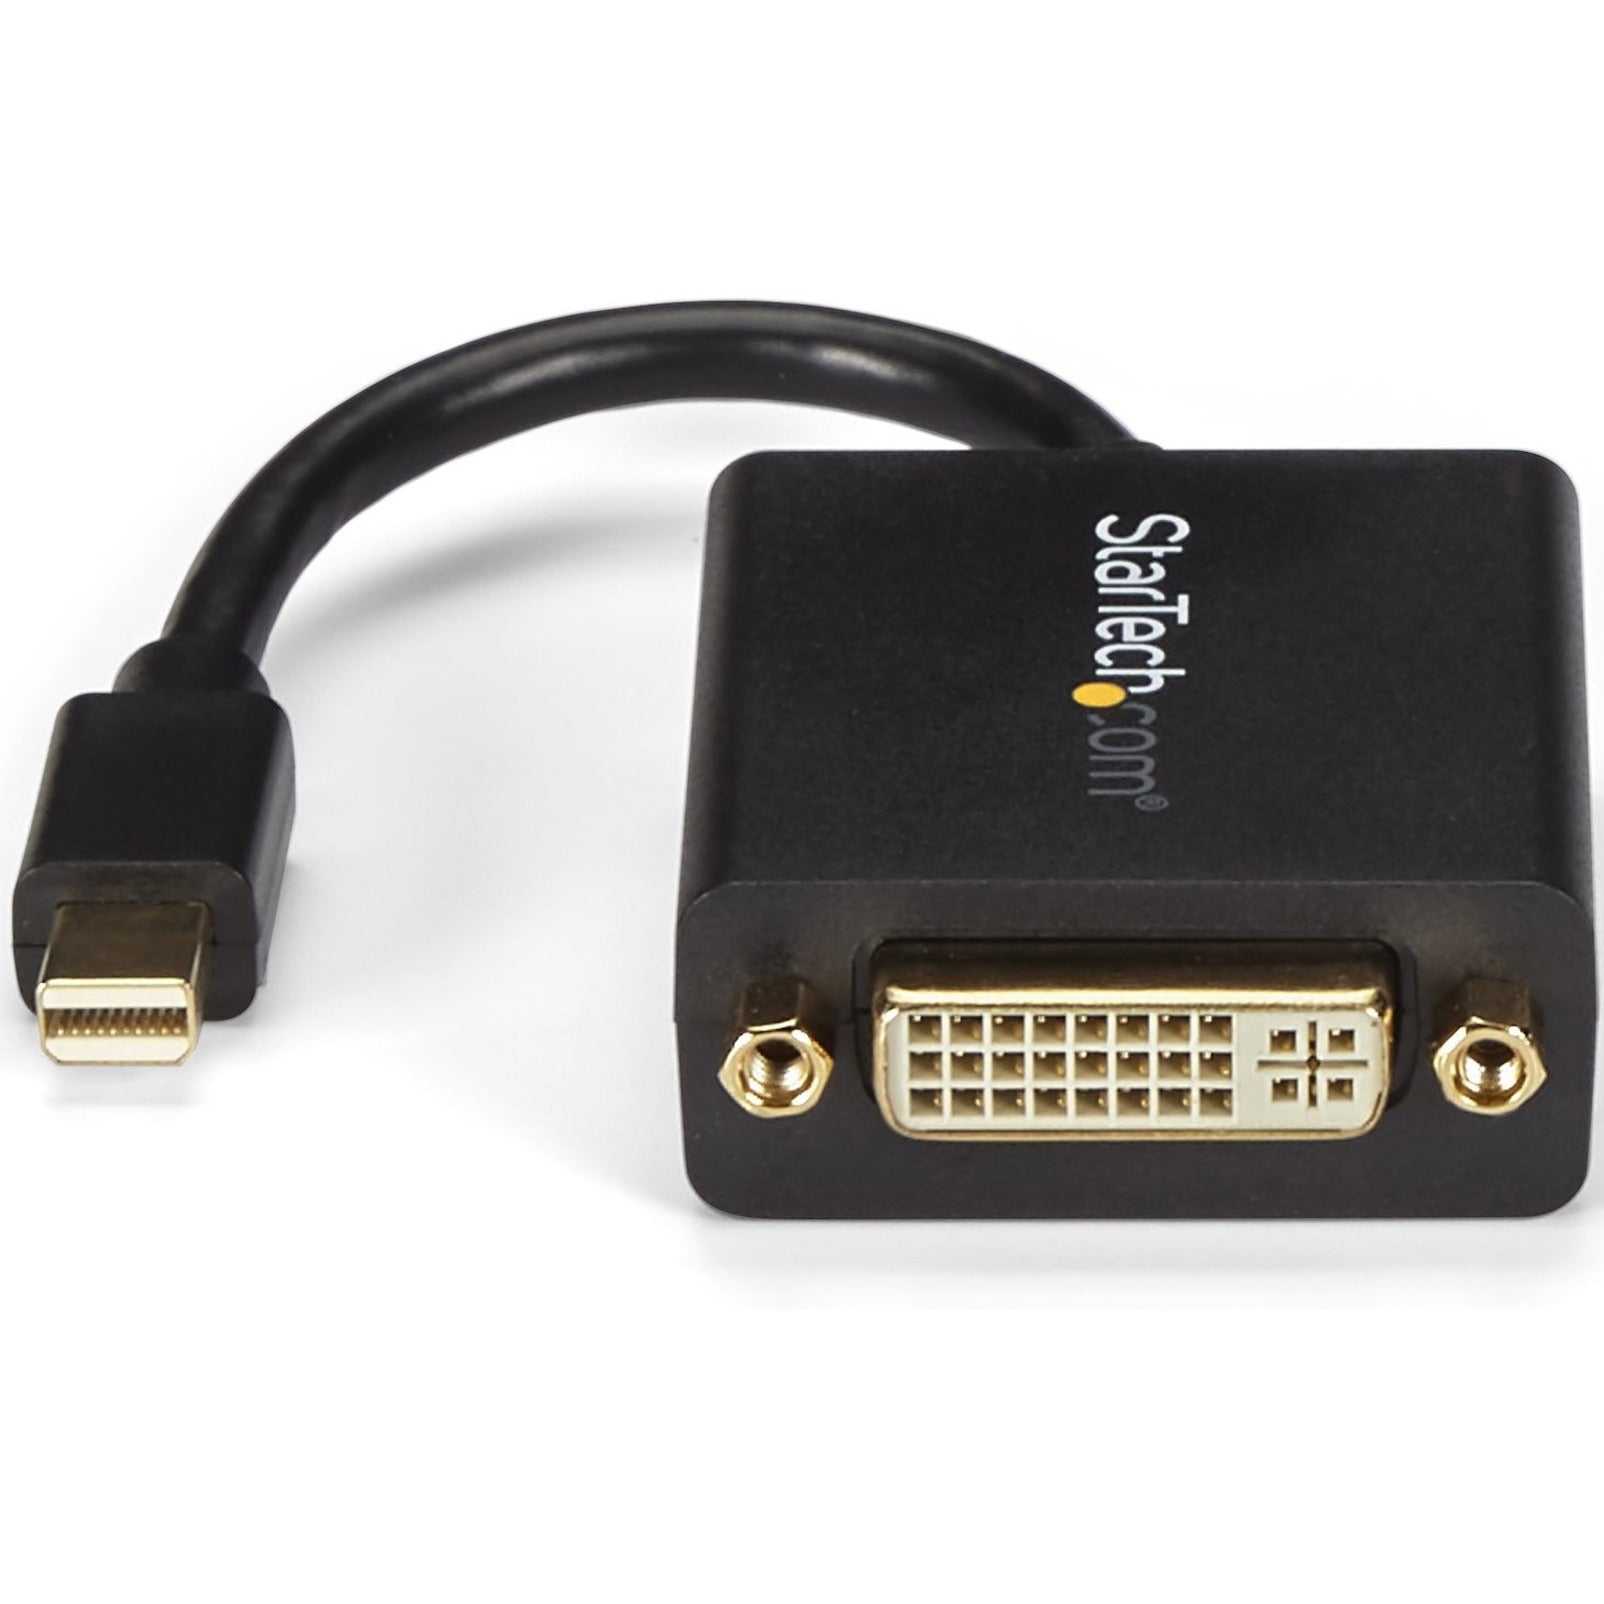 StarTech.com MDP2DVI Mini DisplayPort to DVI Video Adapter Converter, Connect Your DisplayPort Device to a DVI Monitor